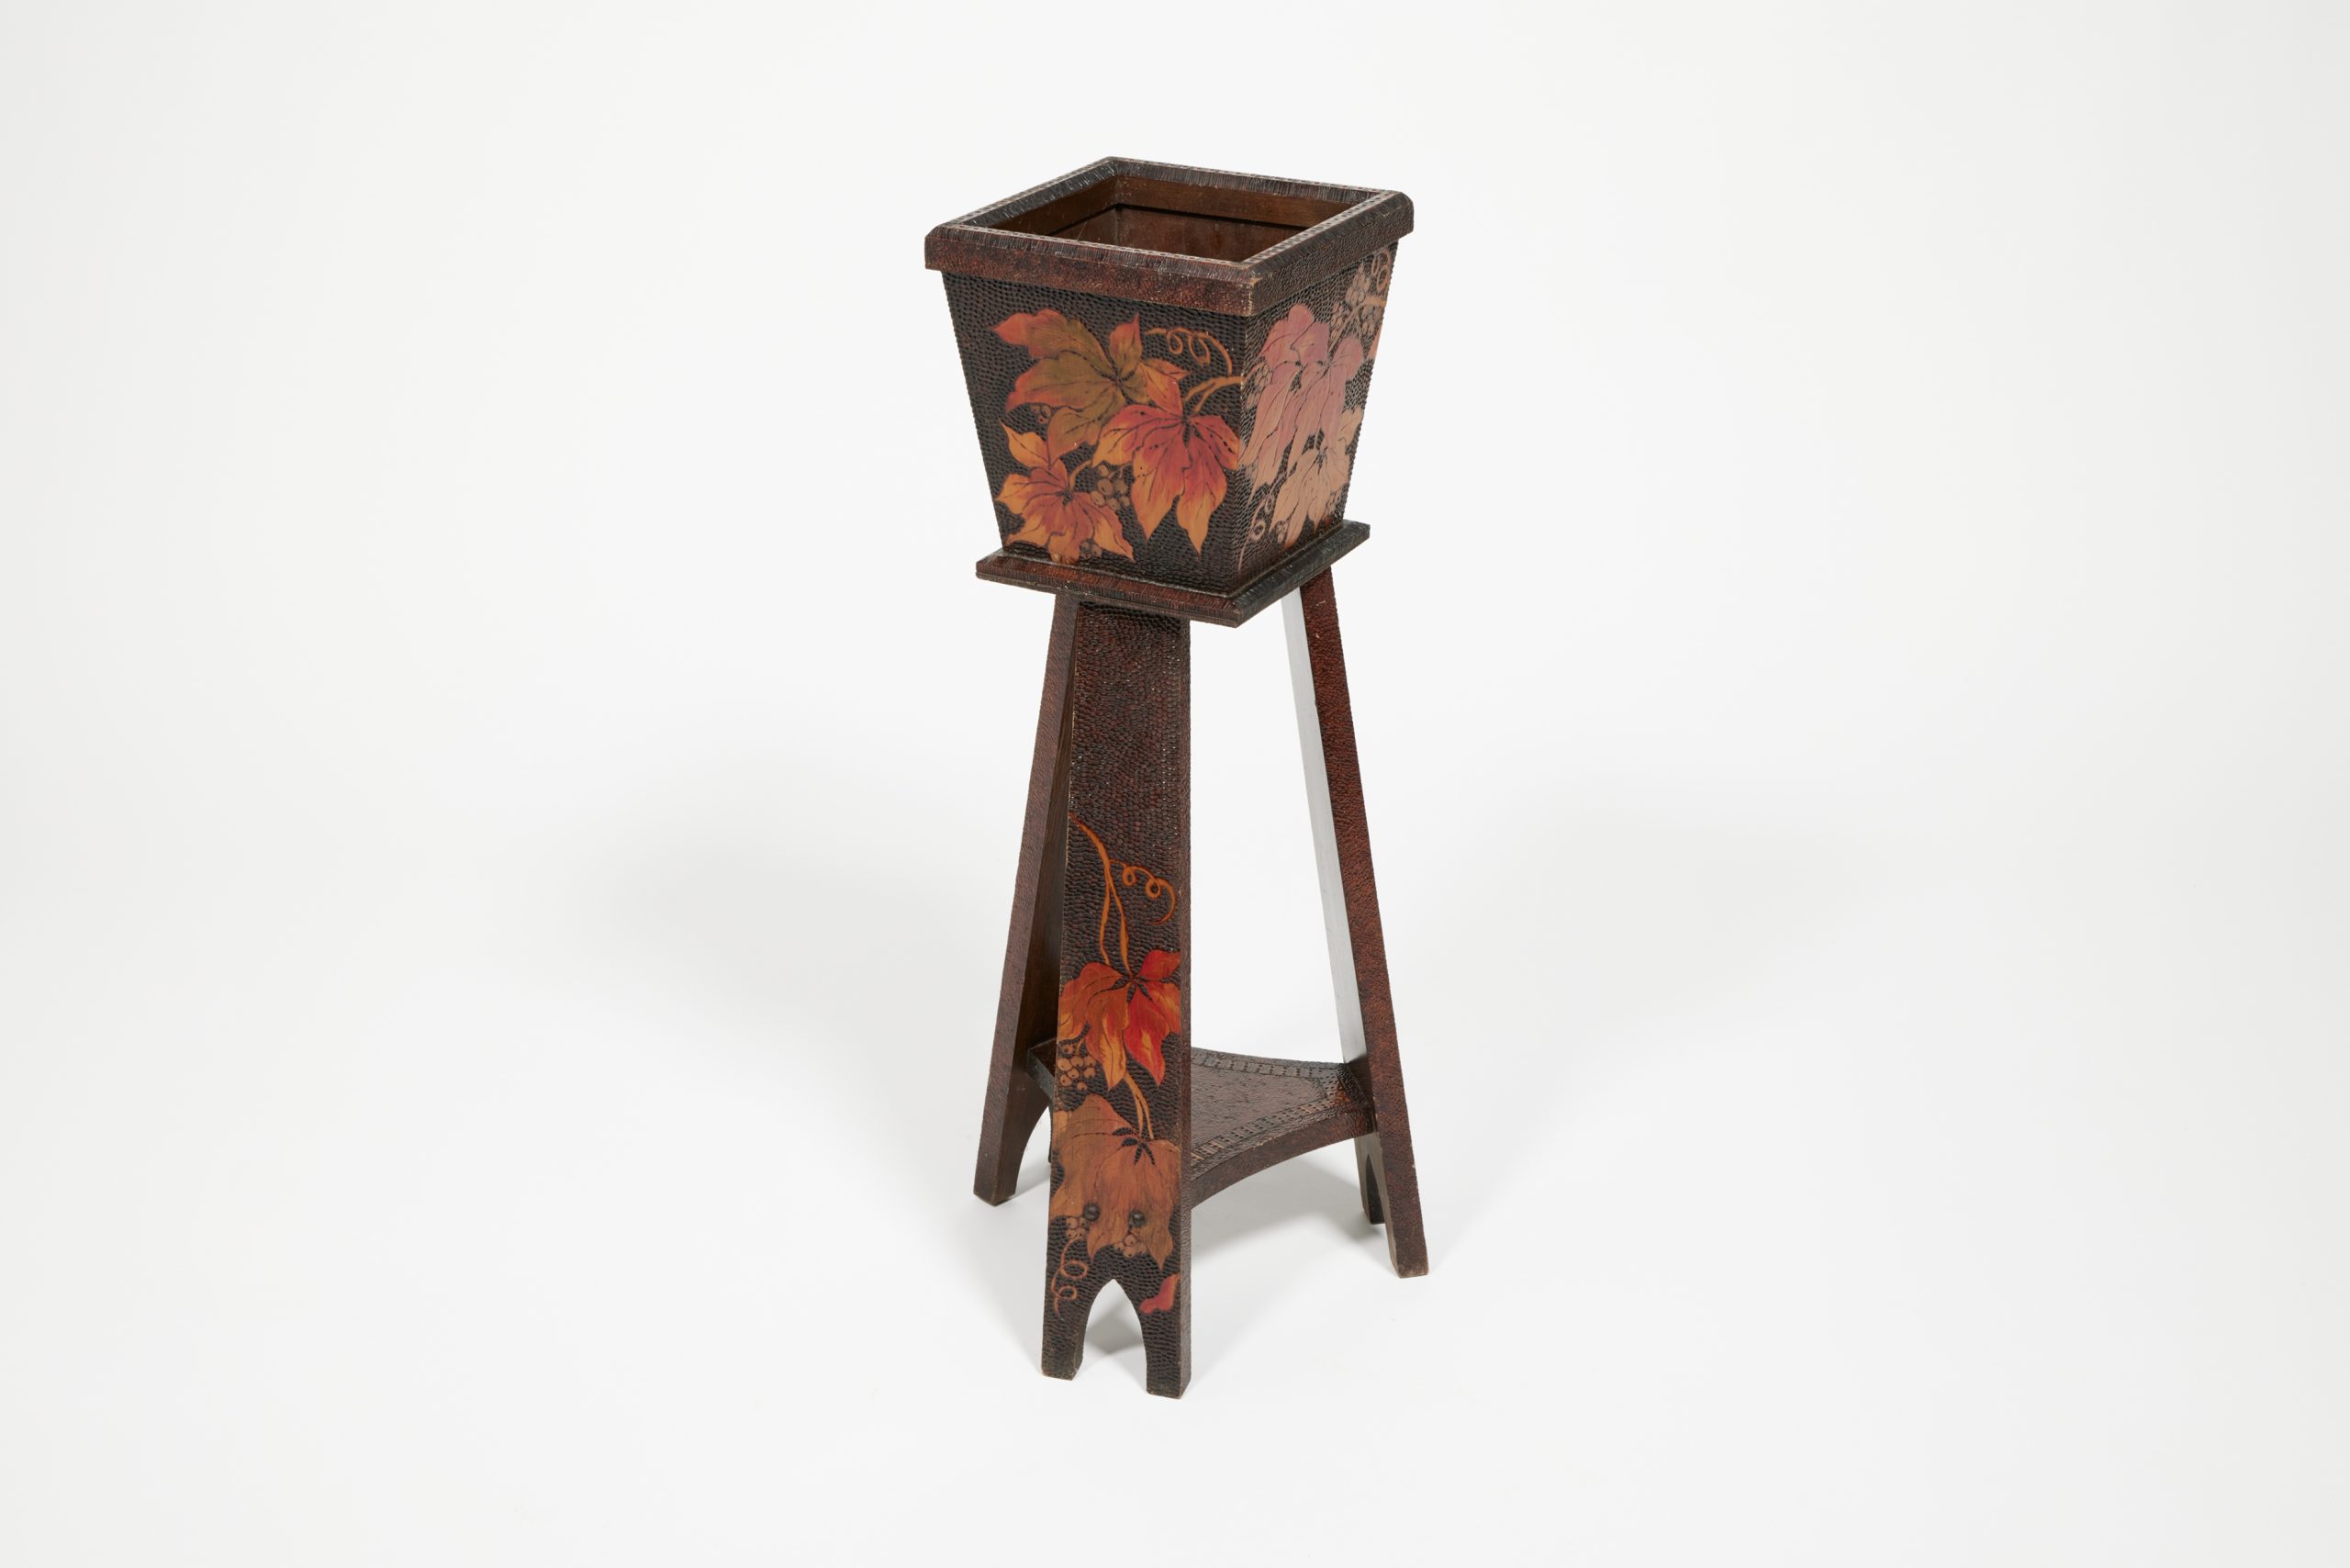 Wooden box on three, wide, wooden legs; reddish yellow design on dark wood are leaves and vines burned into the surface